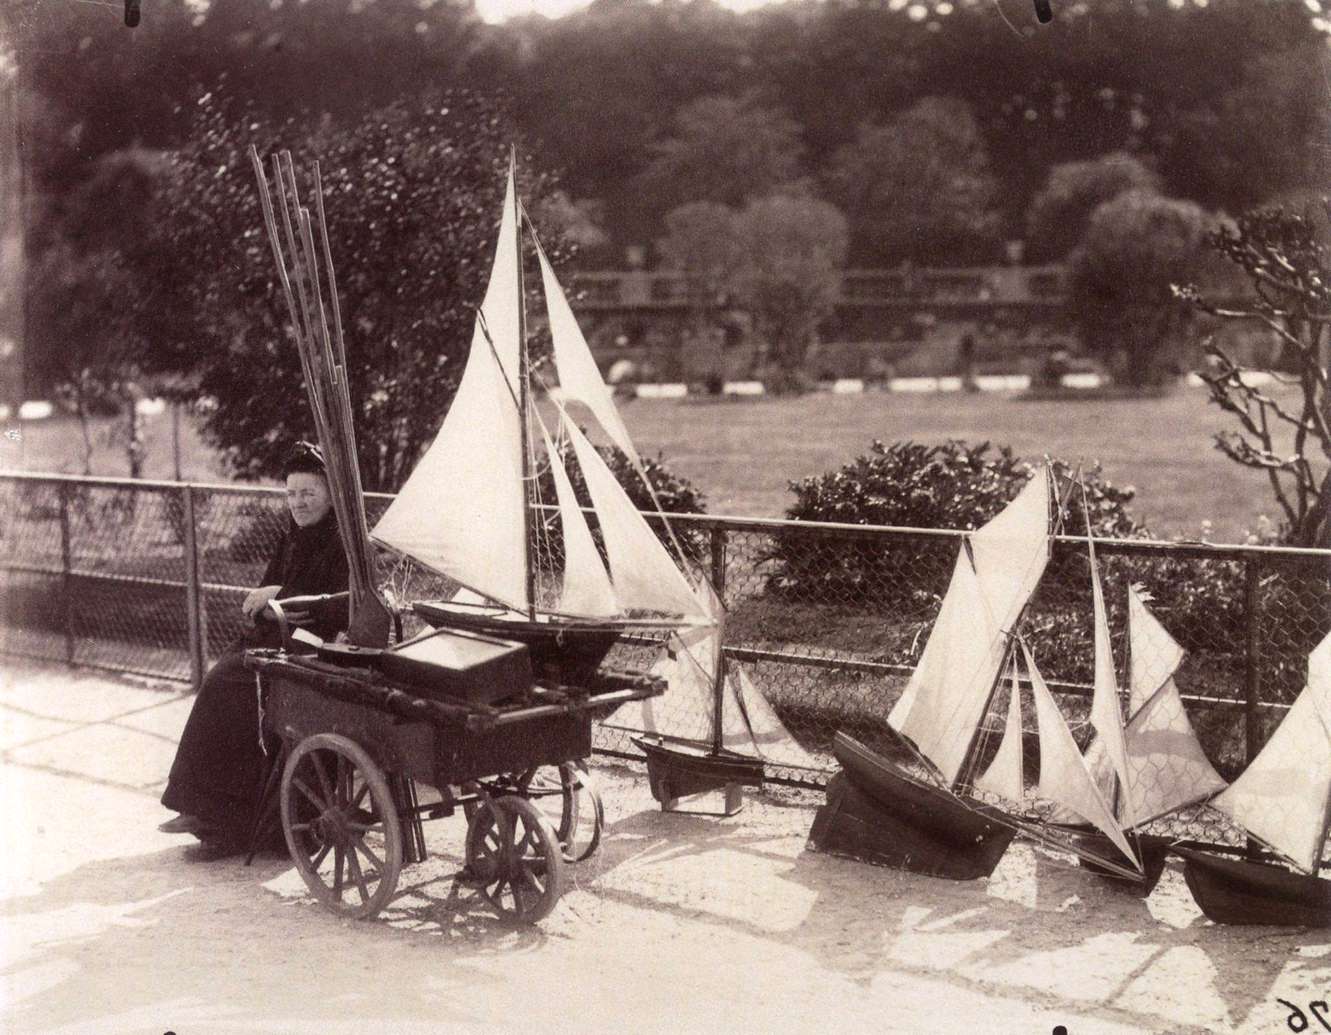 Merchant of small boats in the Luxembourg gardens in Paris, 1899